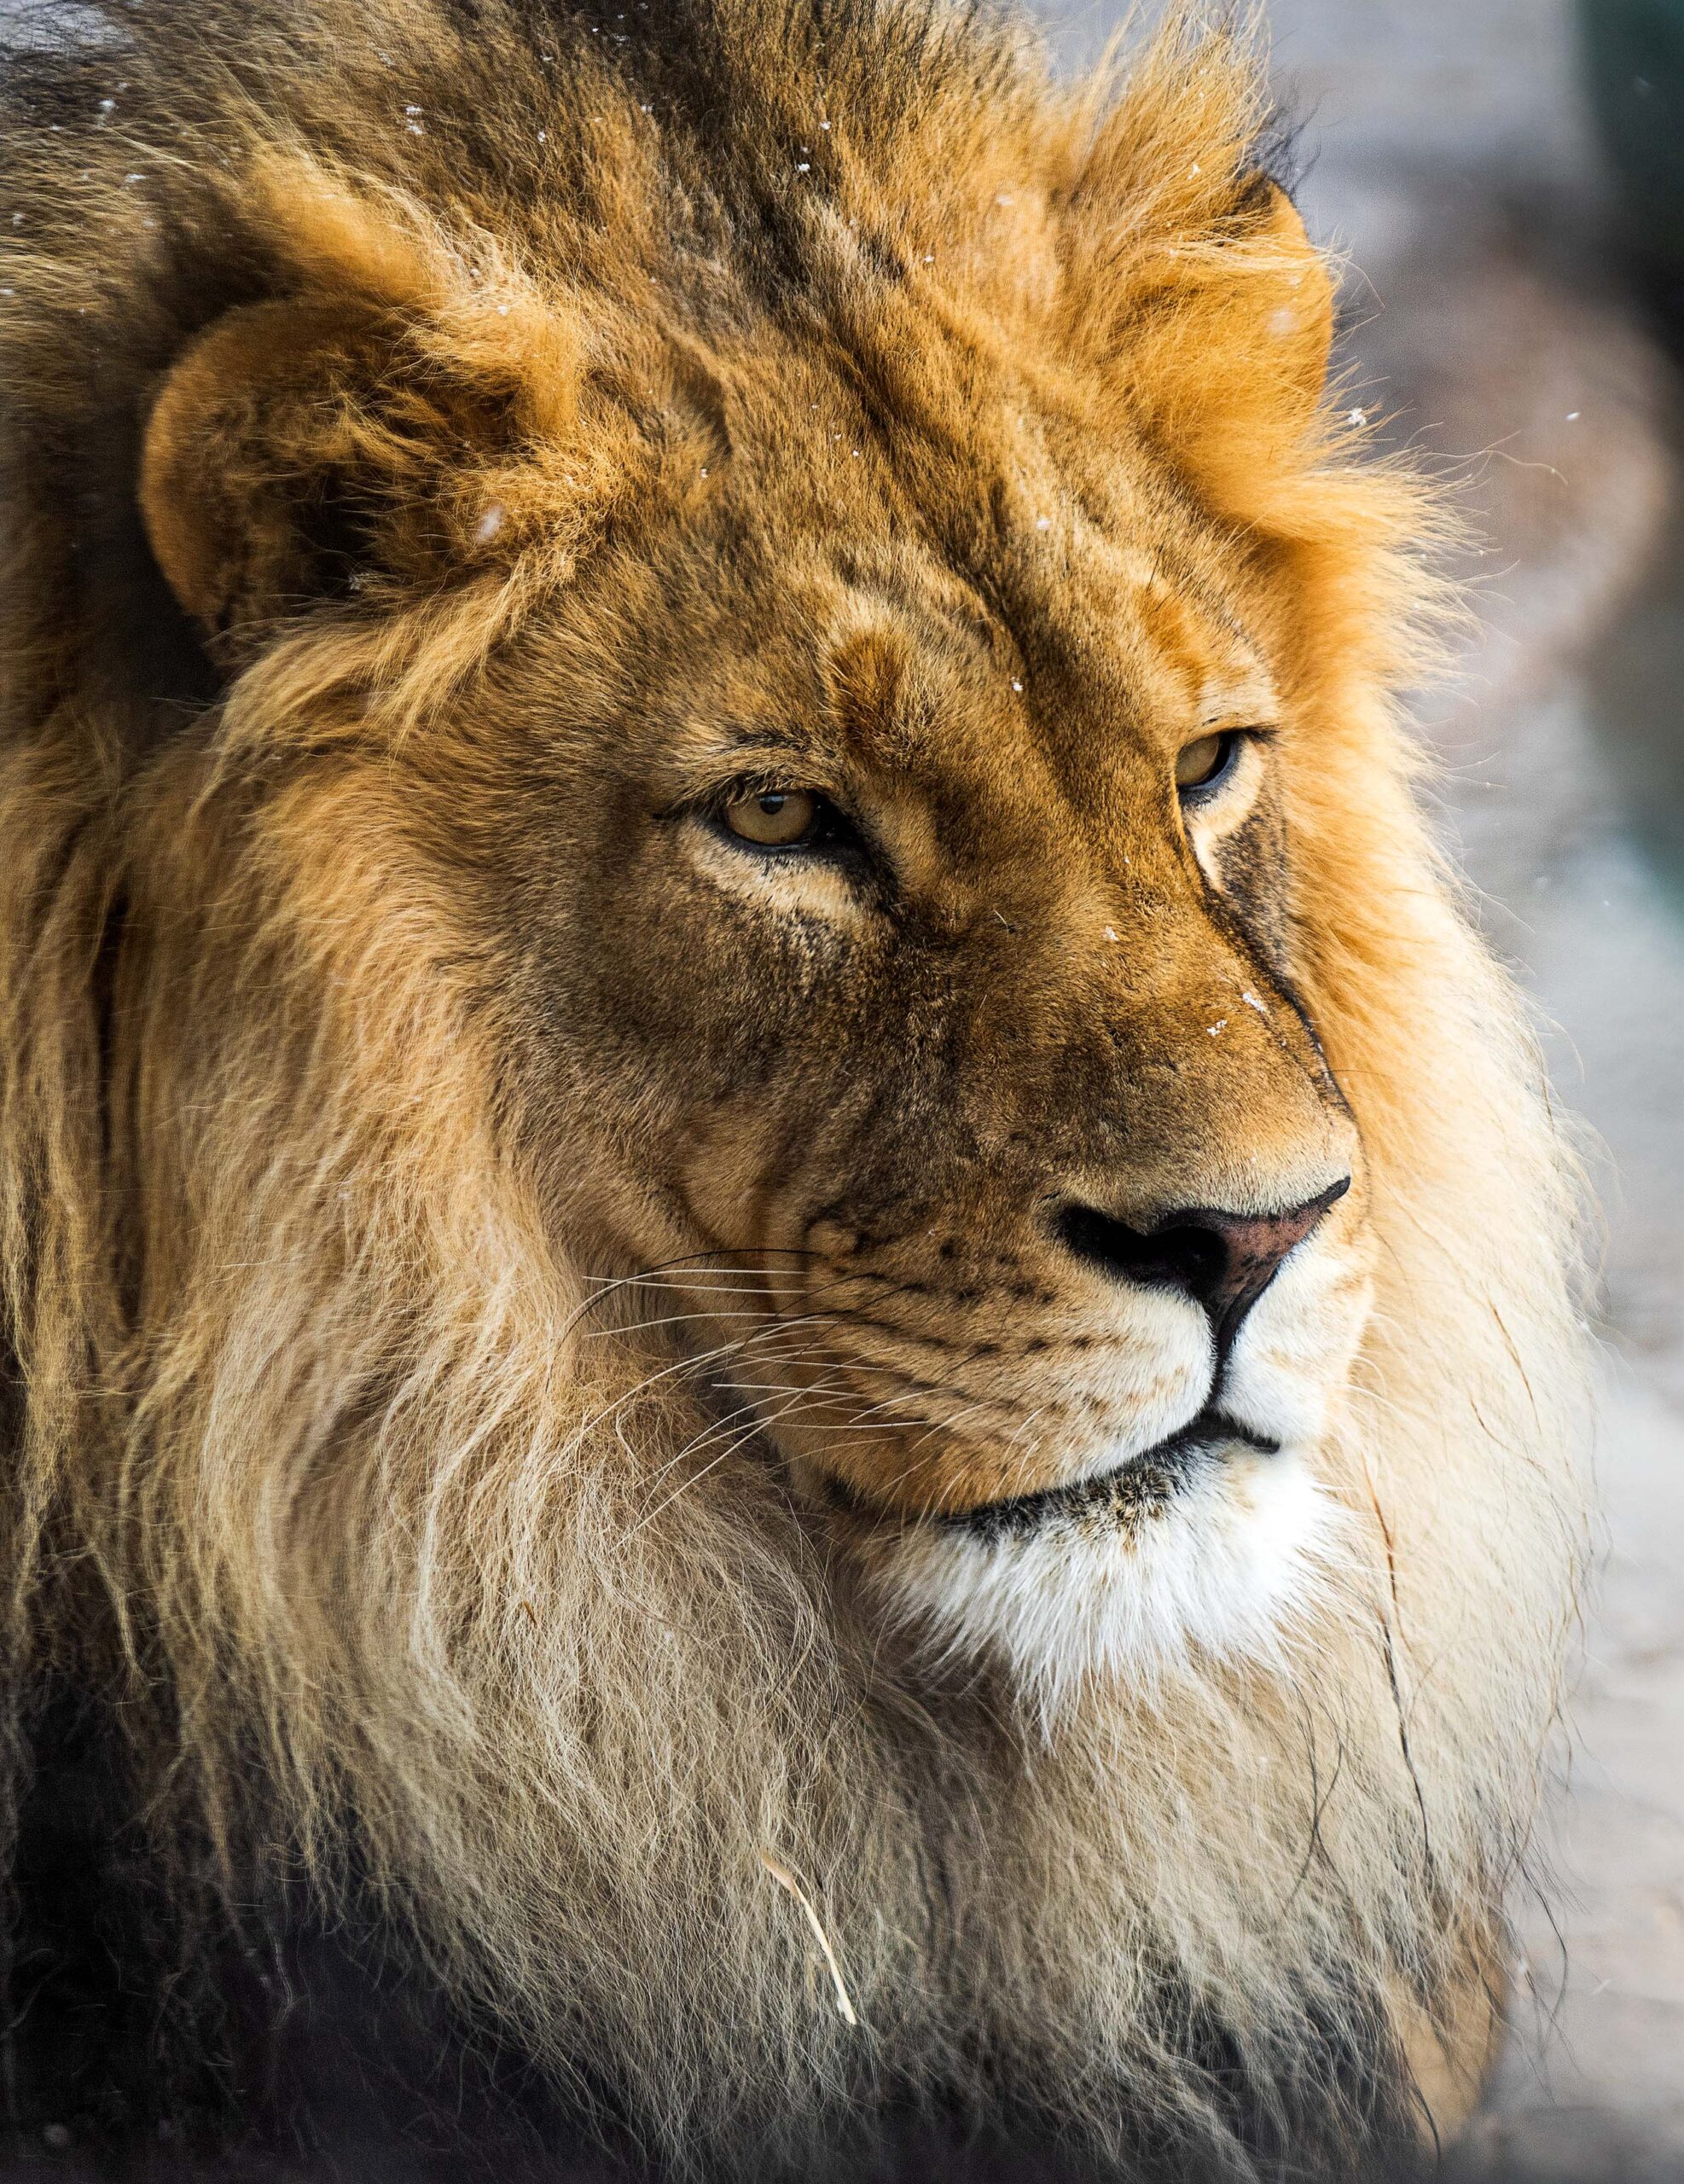 Male lion at Utah's Hogle Zoo in color.